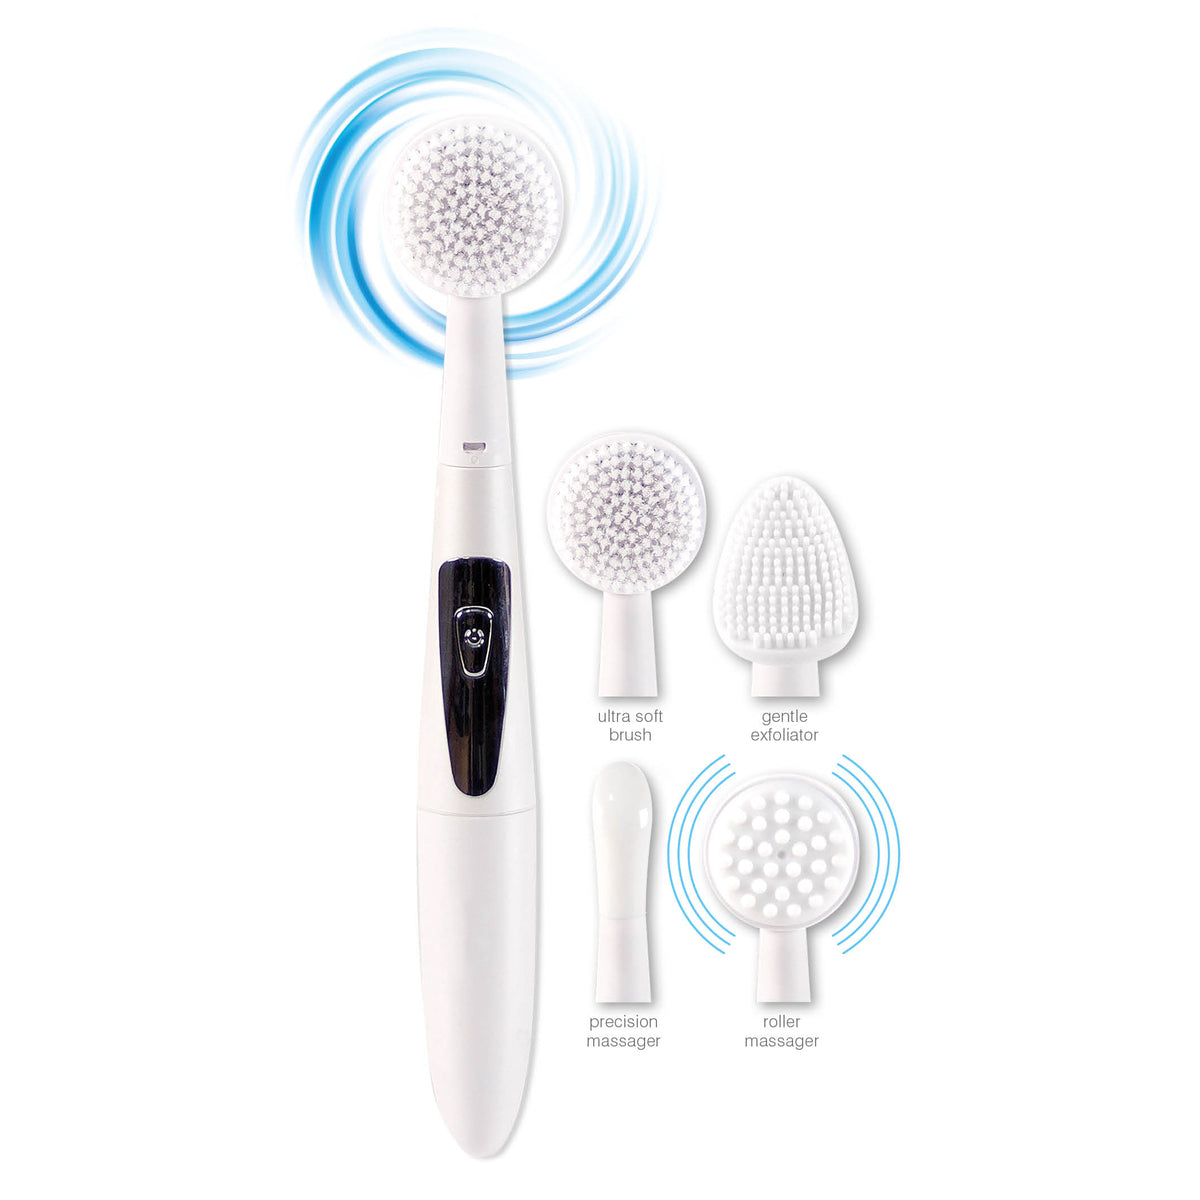 4 in 1 Facial Cleansing Brush, Exfoliator and Massager